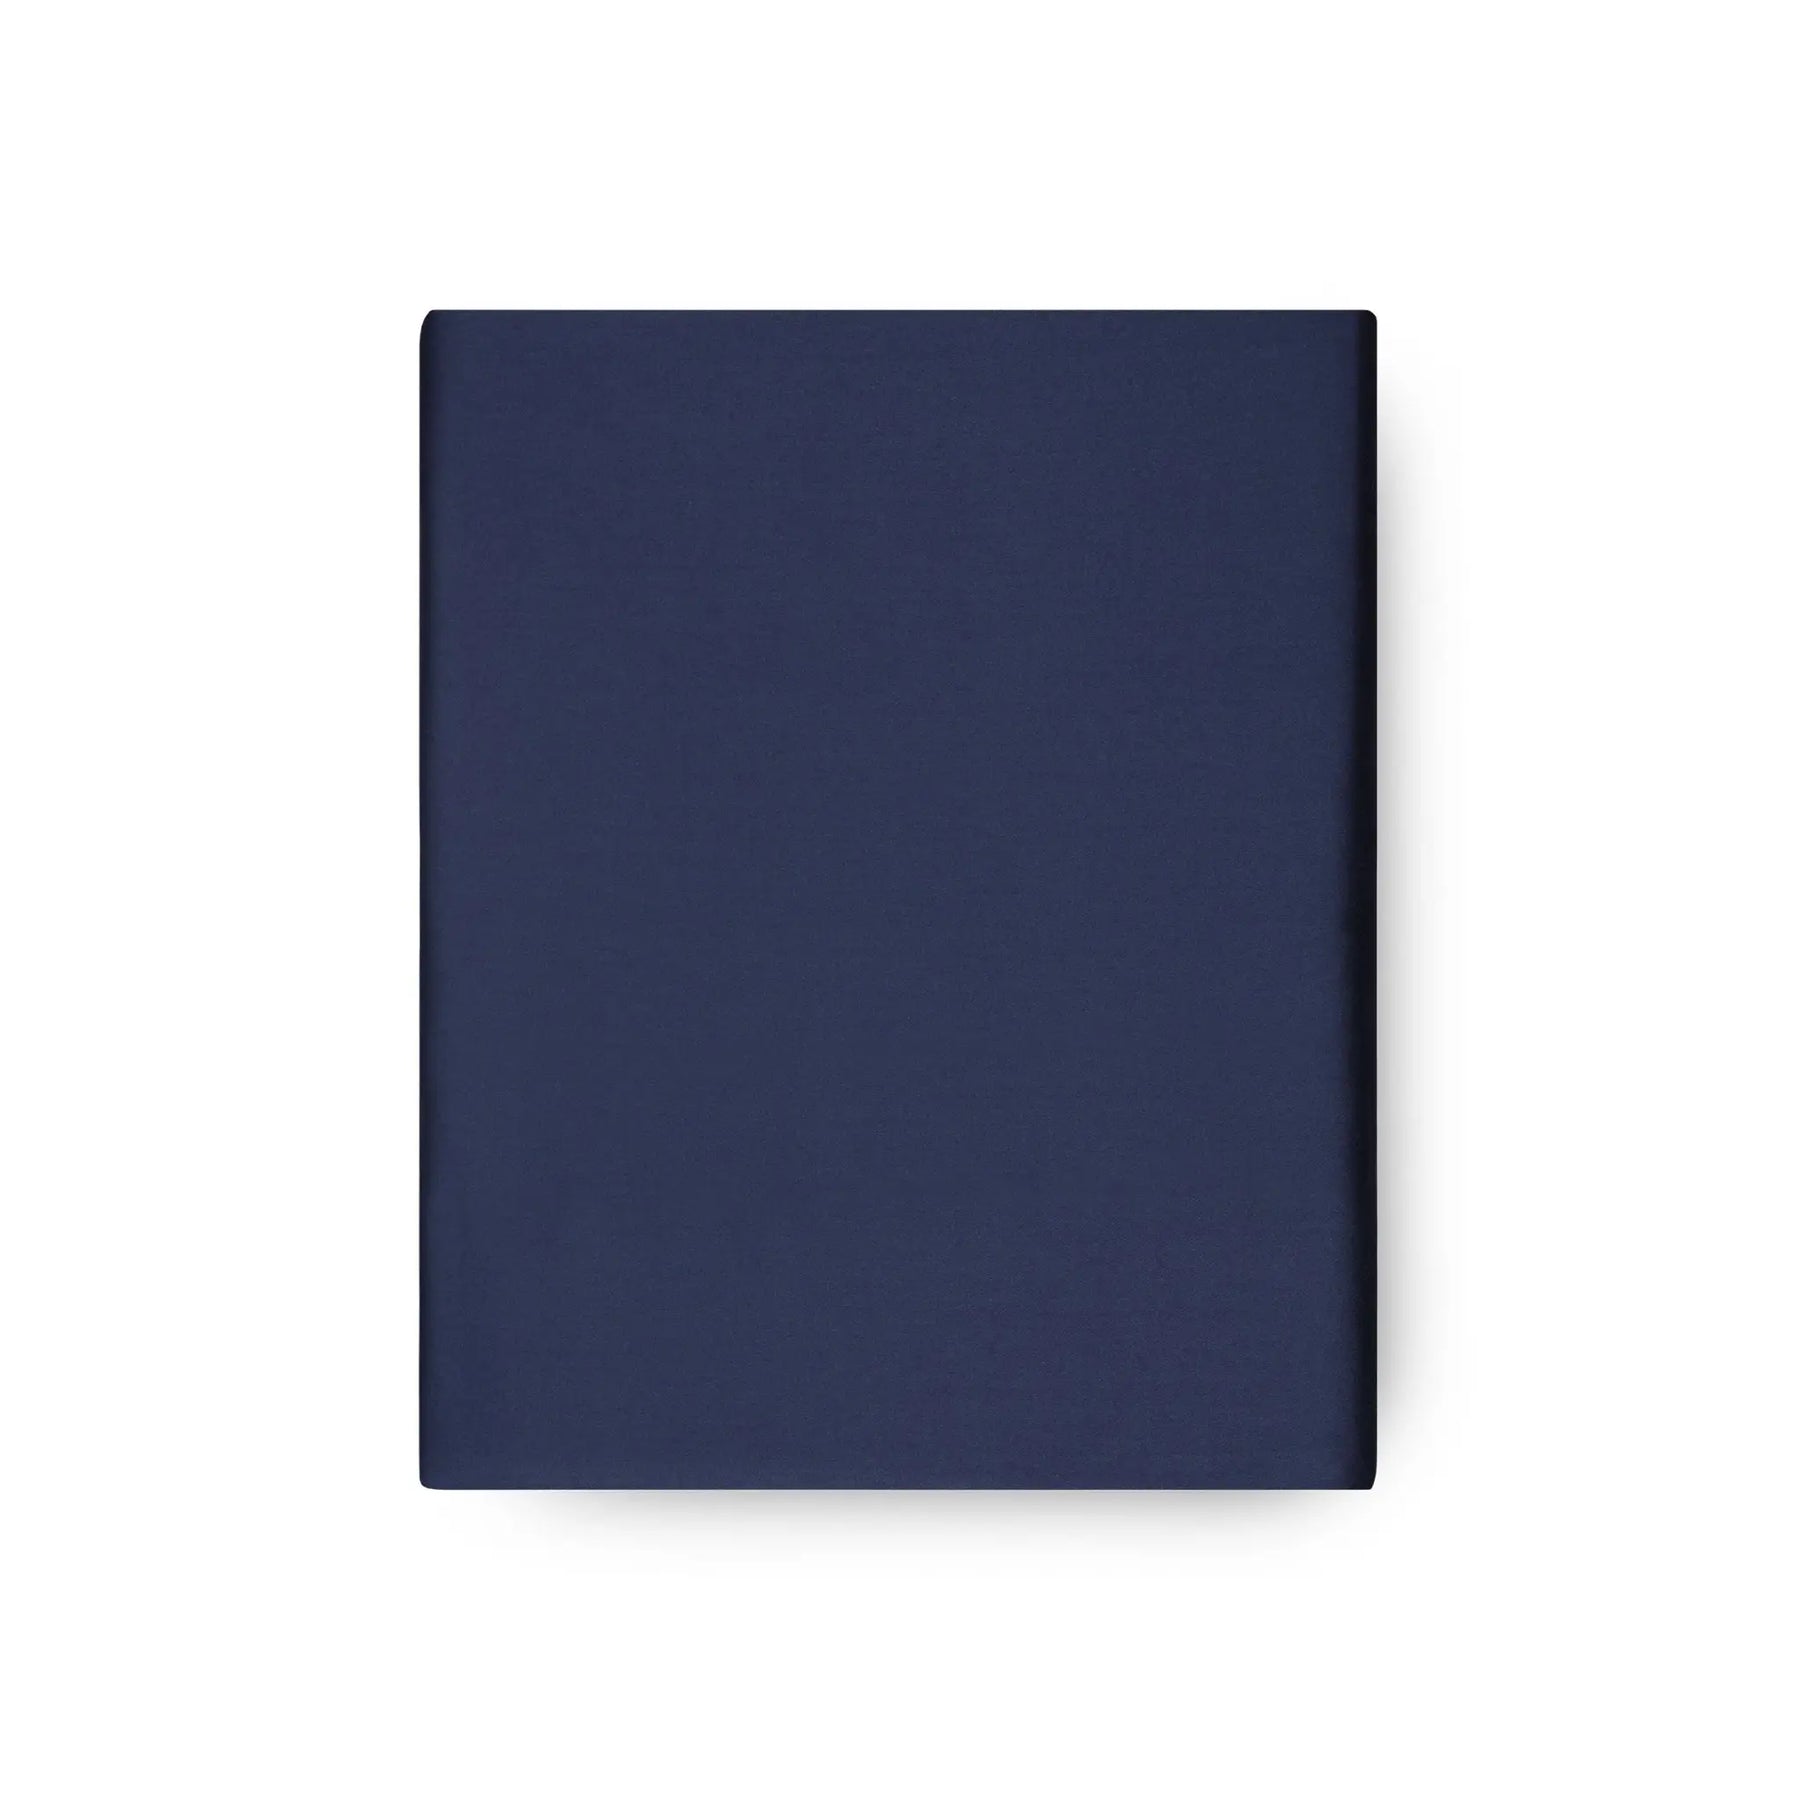 Amalia Home Suave Fitted Sheet in Midnight